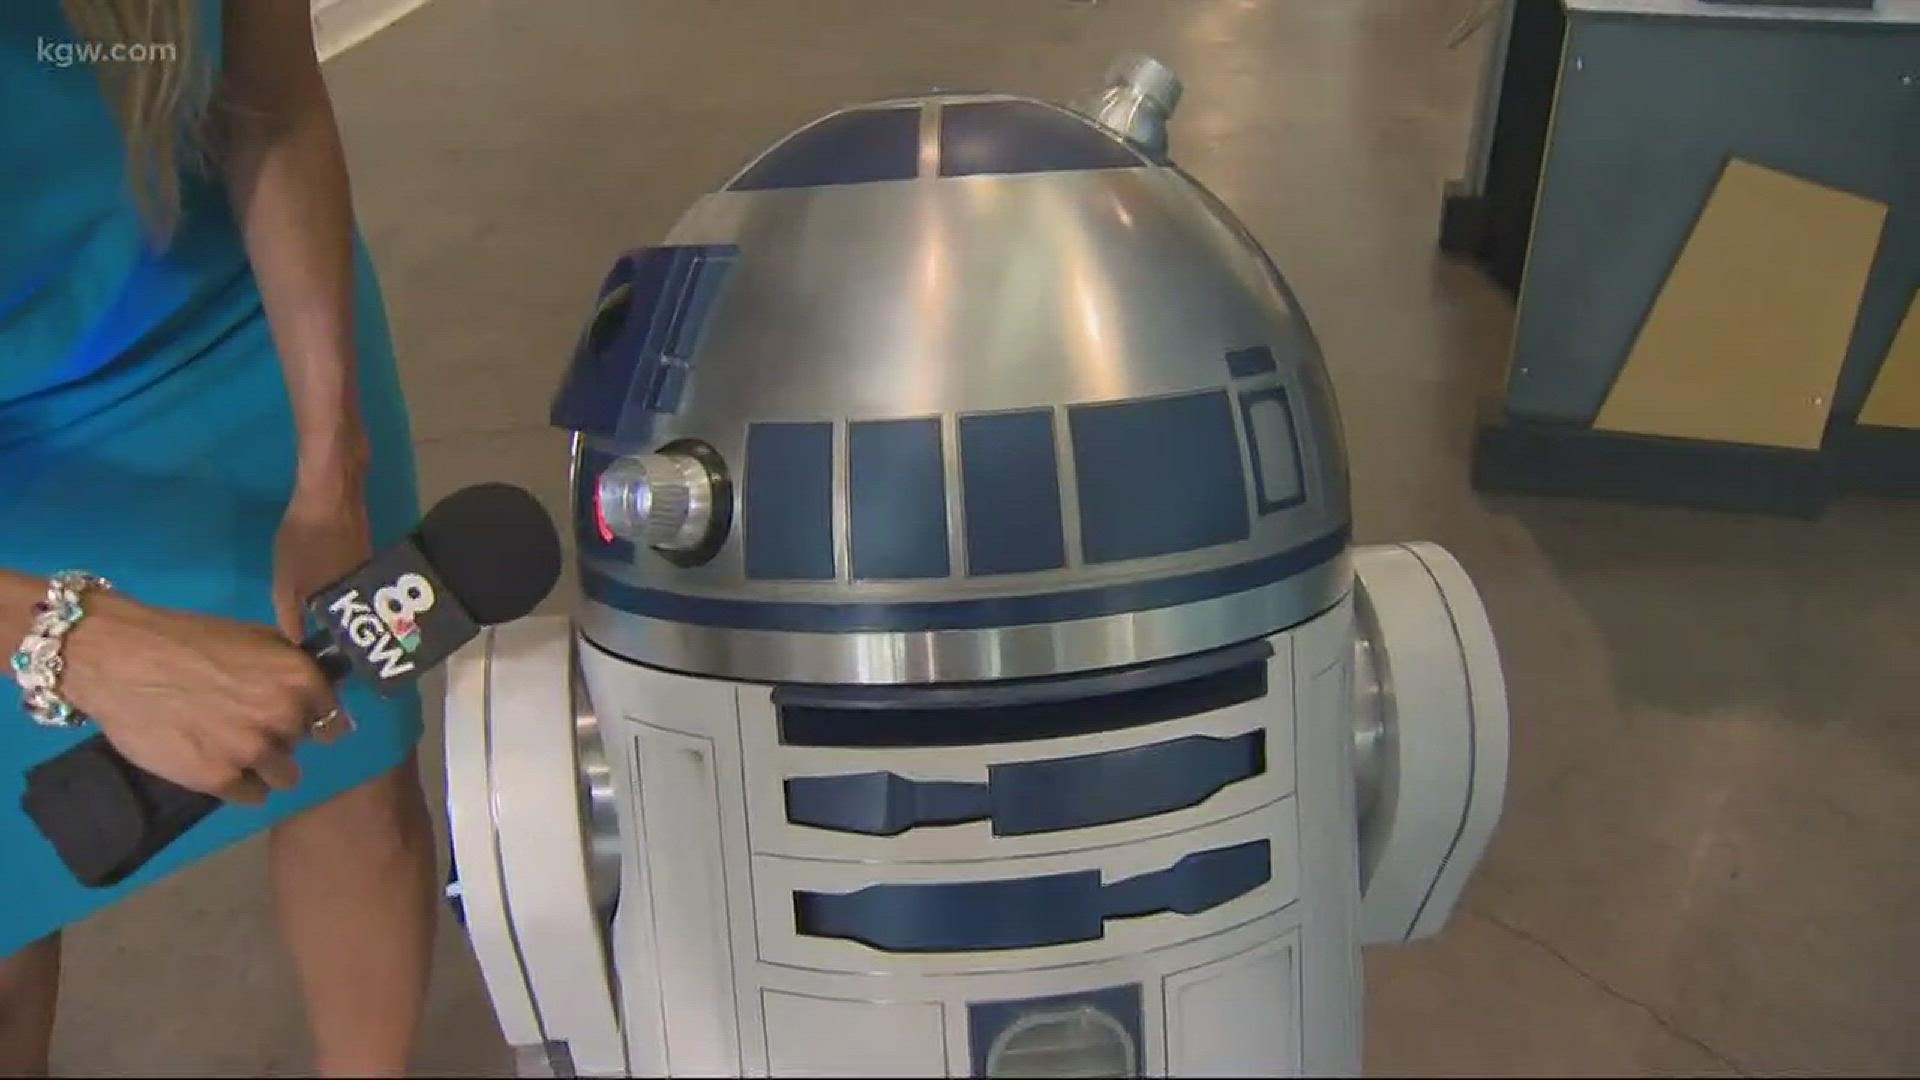 McKinzie dances with R2D2 at OMSI